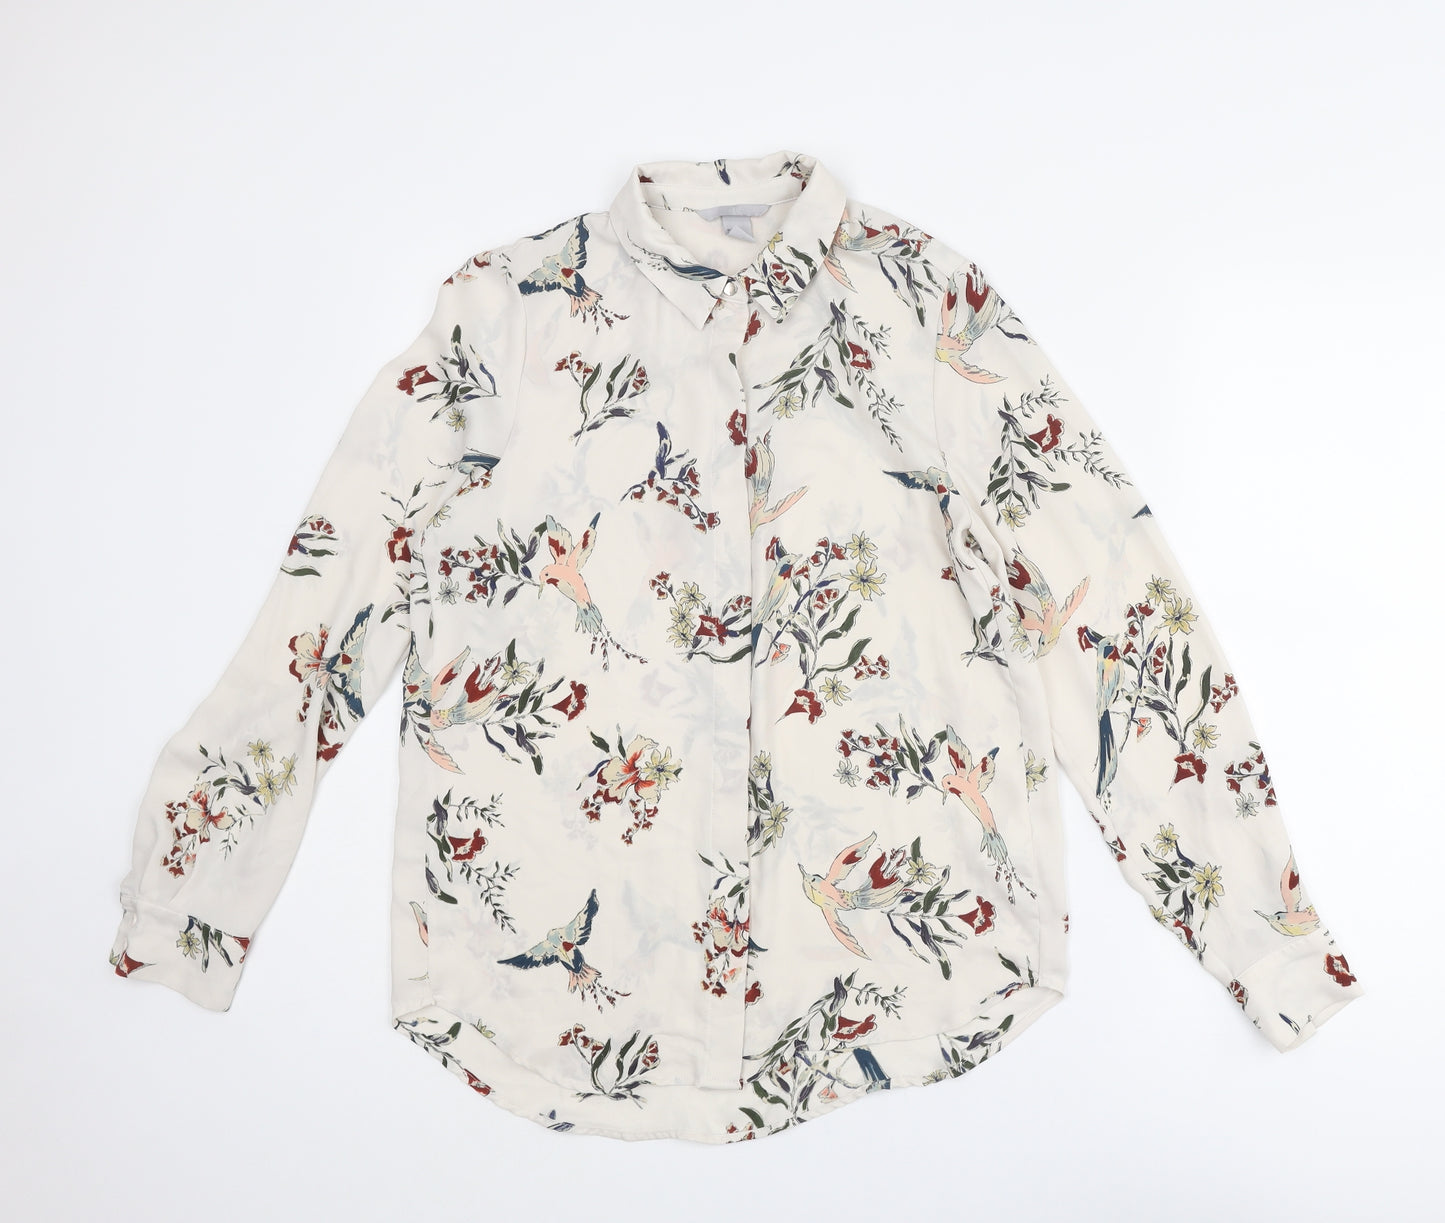 H&M Womens Ivory Floral Polyester Basic Button-Up Size 6 Collared - Bird Print